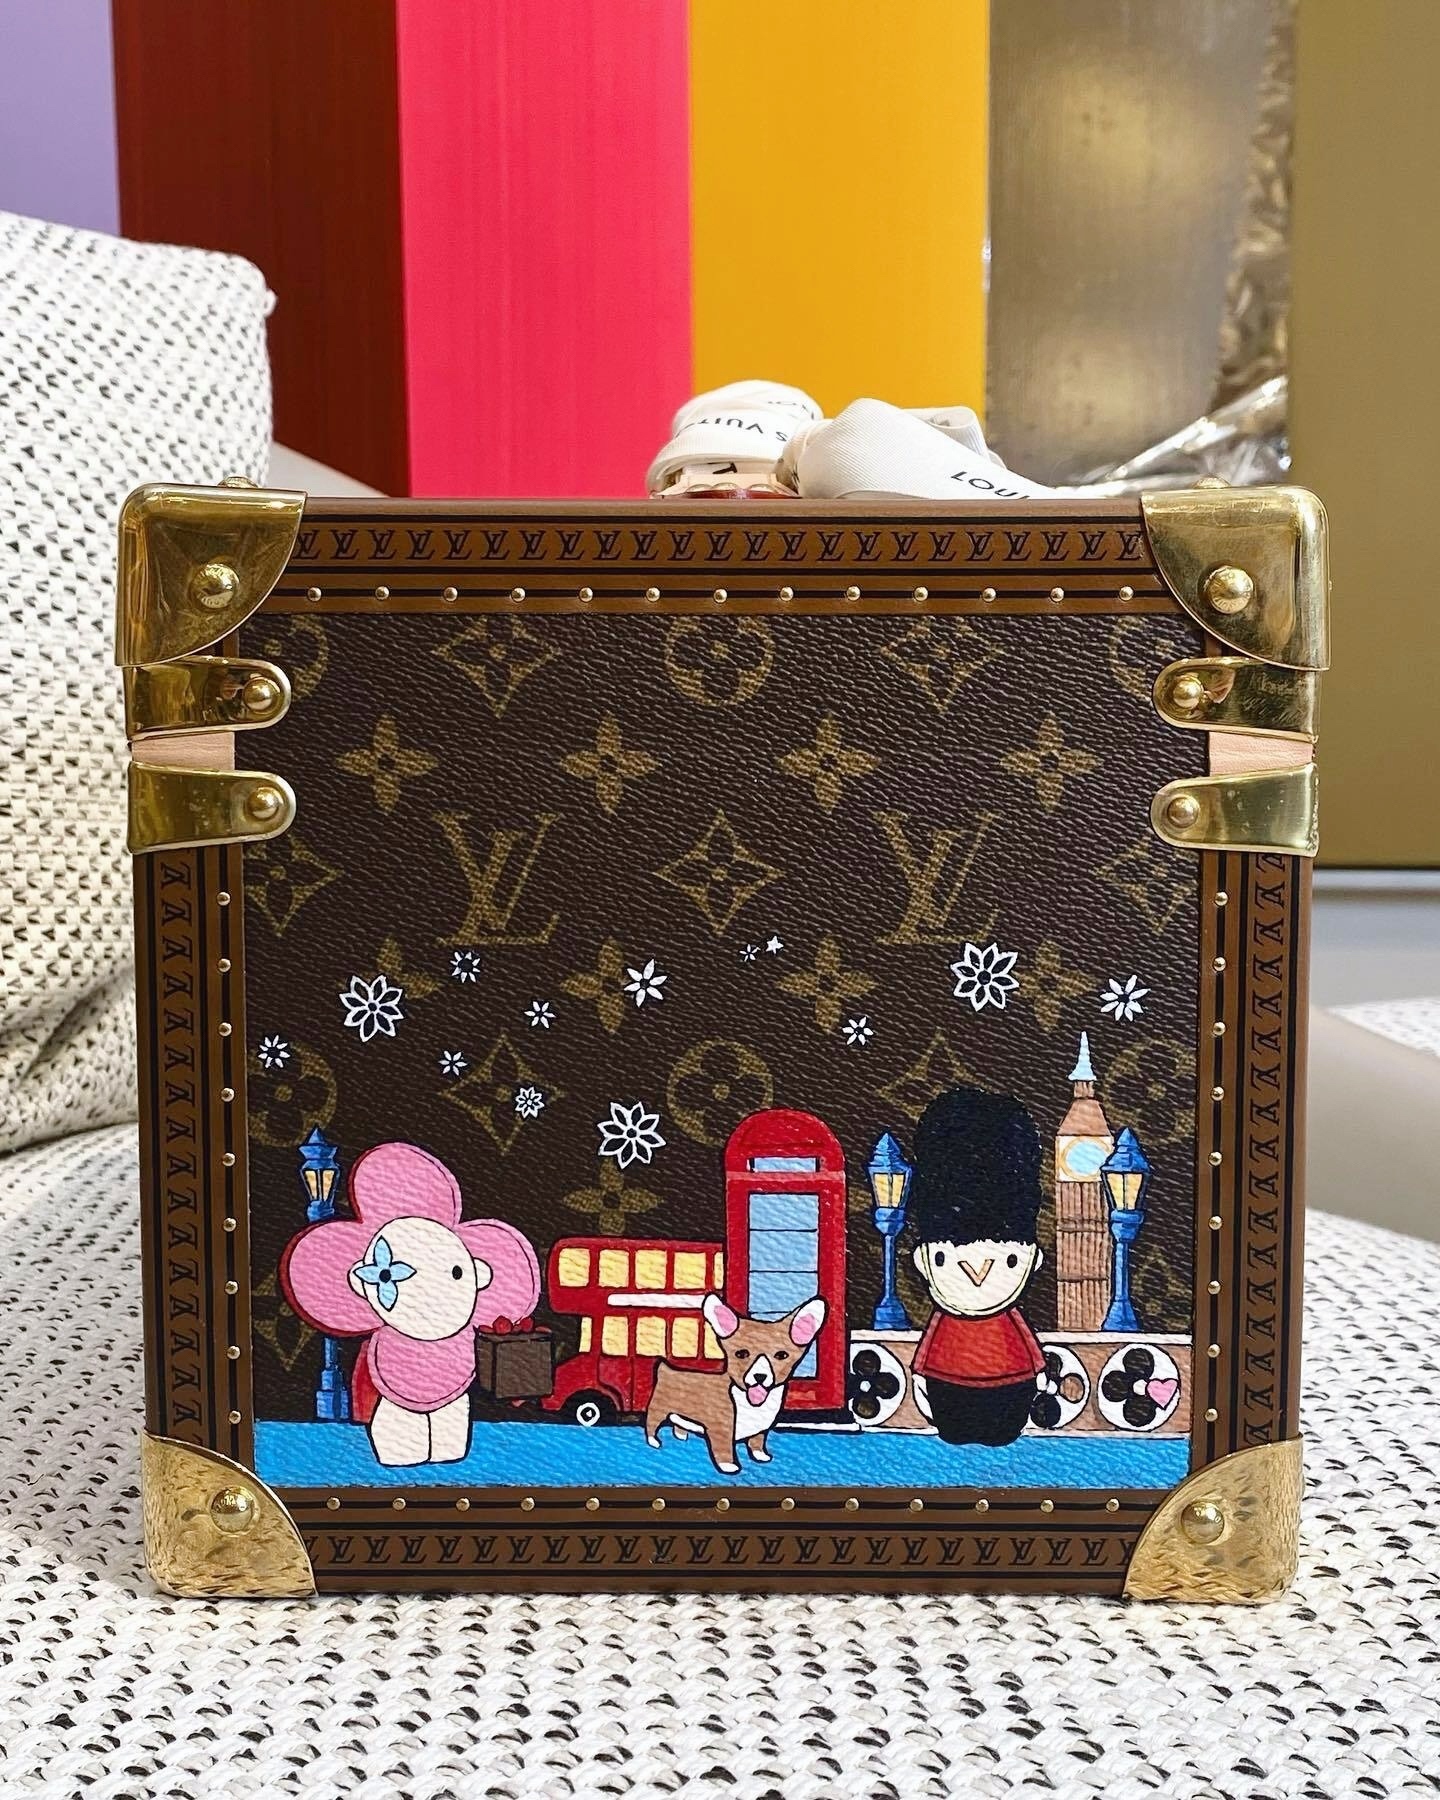 South Coast Plaza on X: Planning our dream vacation from London 🇬🇧 to  Paris 🇫🇷, then Tokyo 🌸 and back to sunny Southern California 🌴 with  this personalized Louis Vuitton piece. Hand-paint